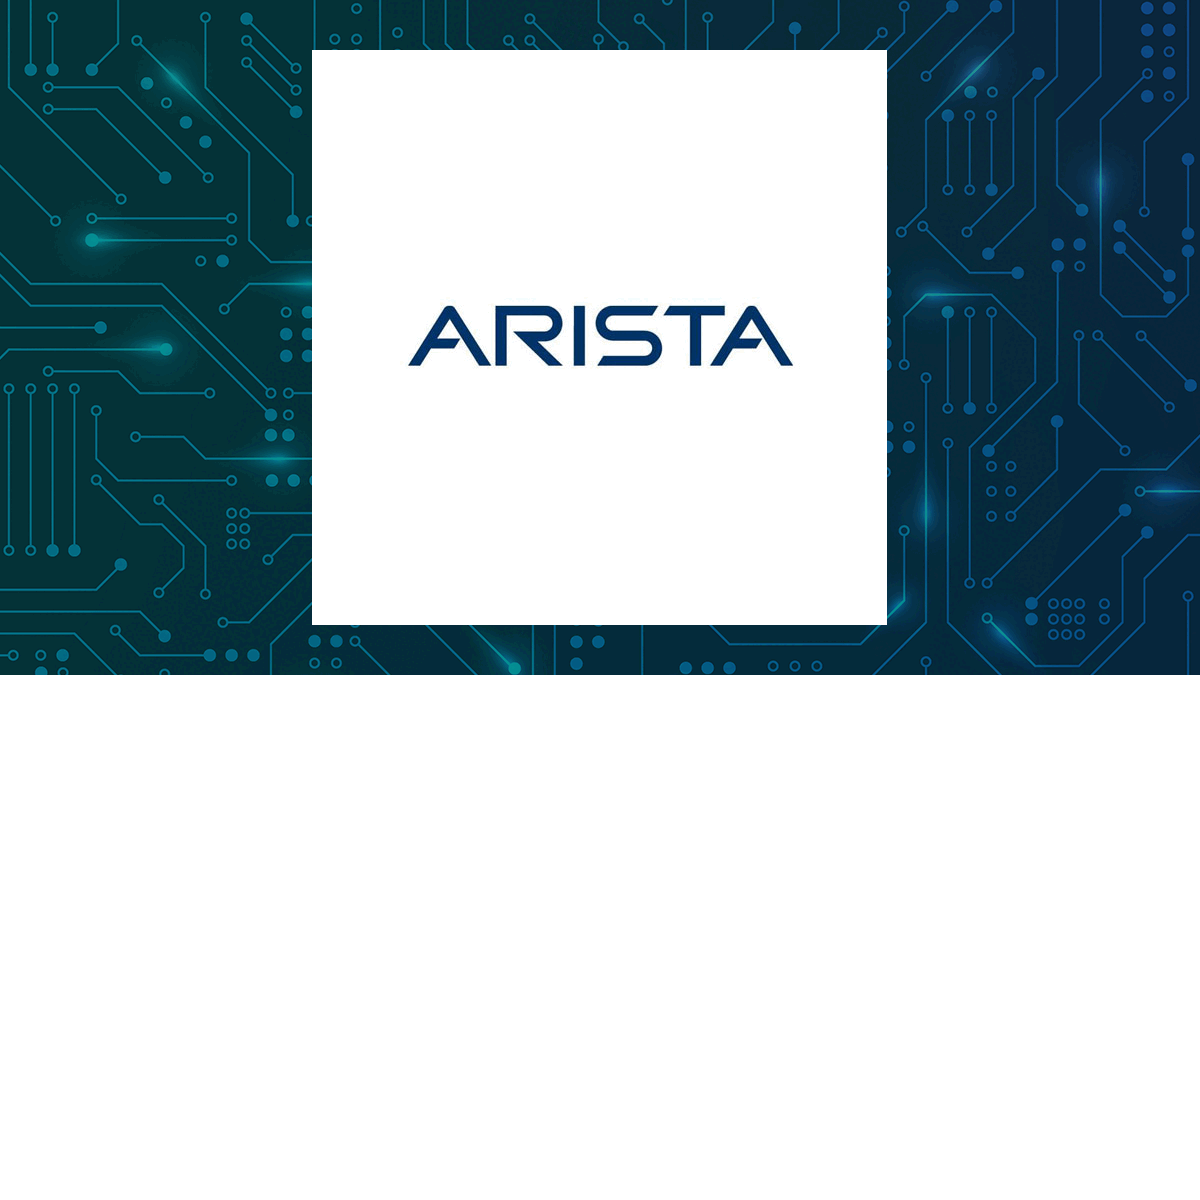 Arista Networks logo with Computer and Technology background